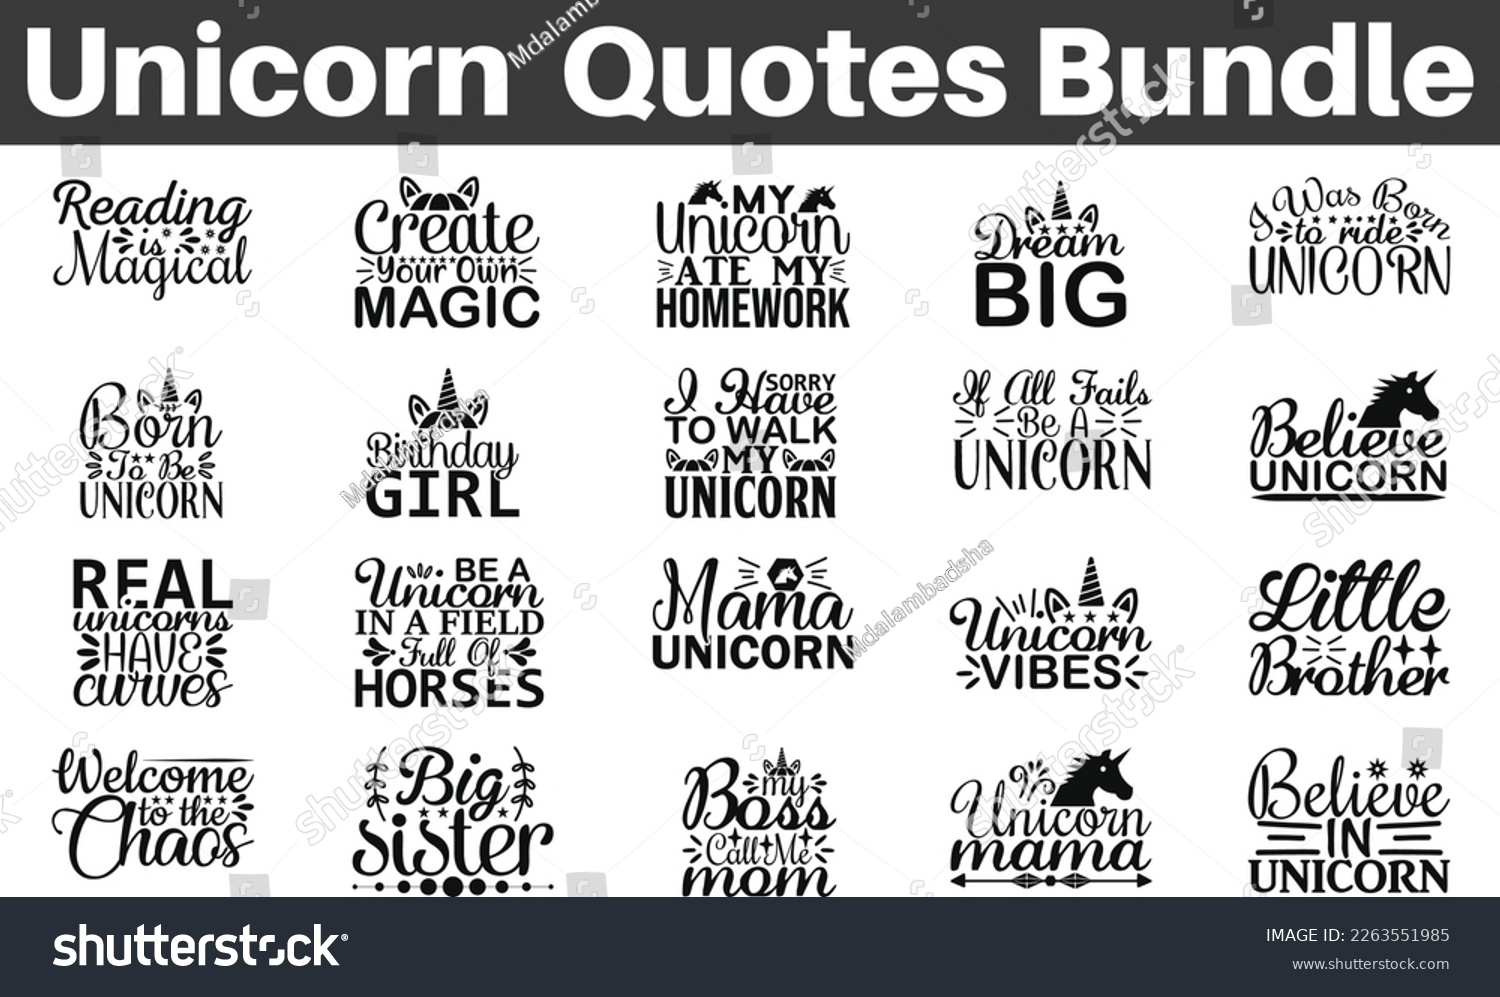 SVG of Unicorn Quotes Bundle,  Quotes about Unicorn, Unicorn Quote, Magical saying eps files, SVG bundle of Magical, svg